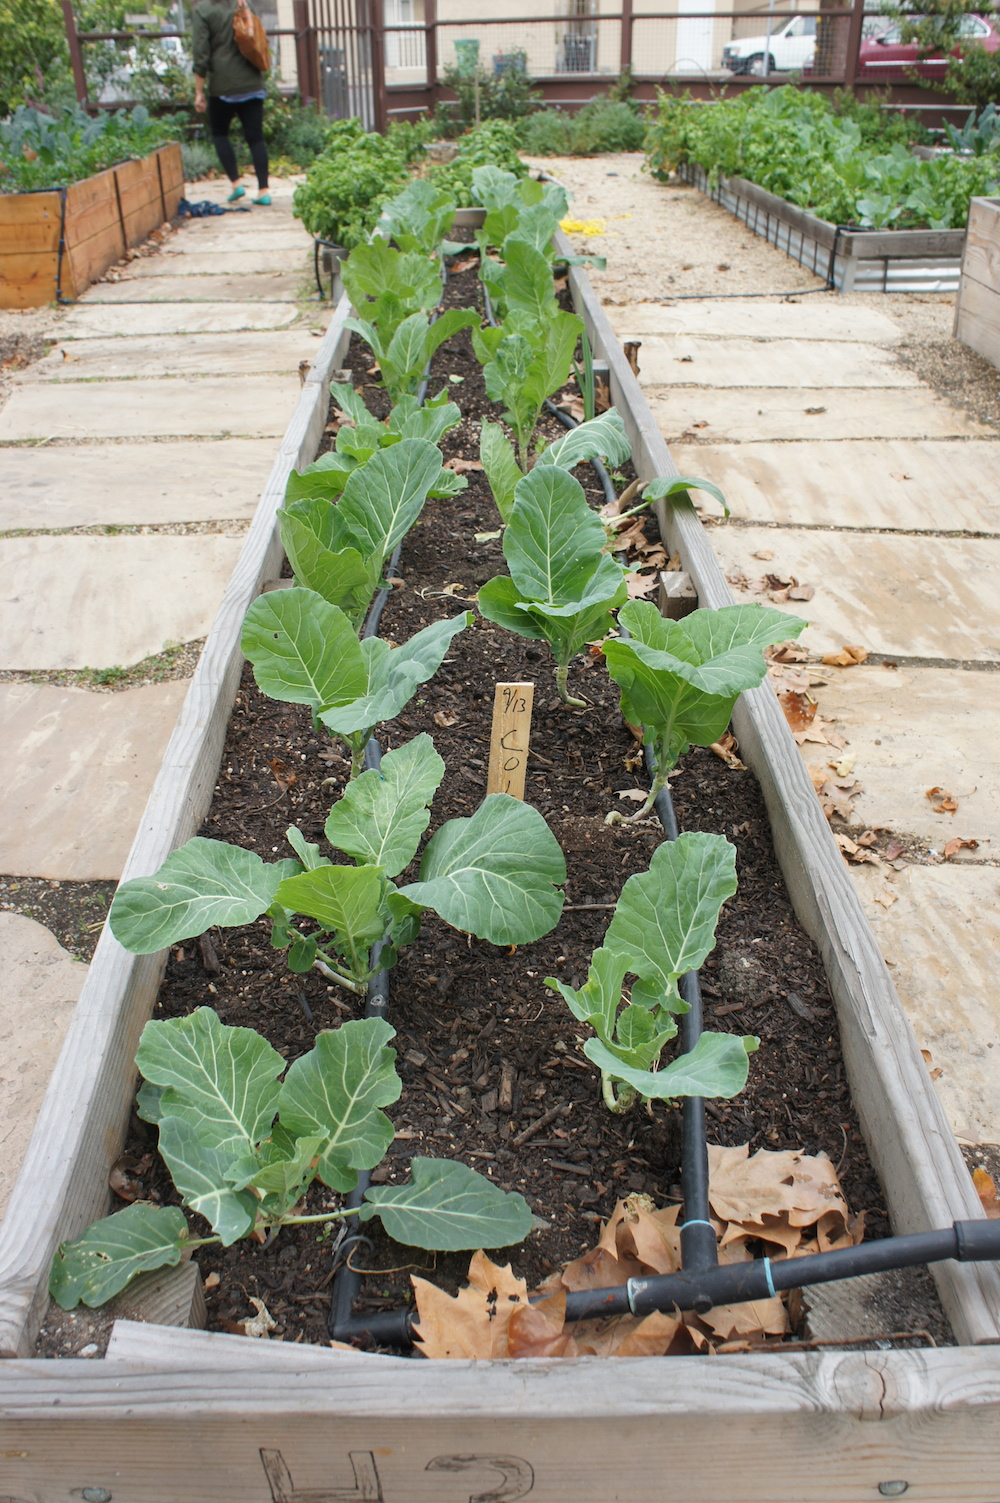 A row of collard greens almost ready for harvest. Photo: Angela Johnston